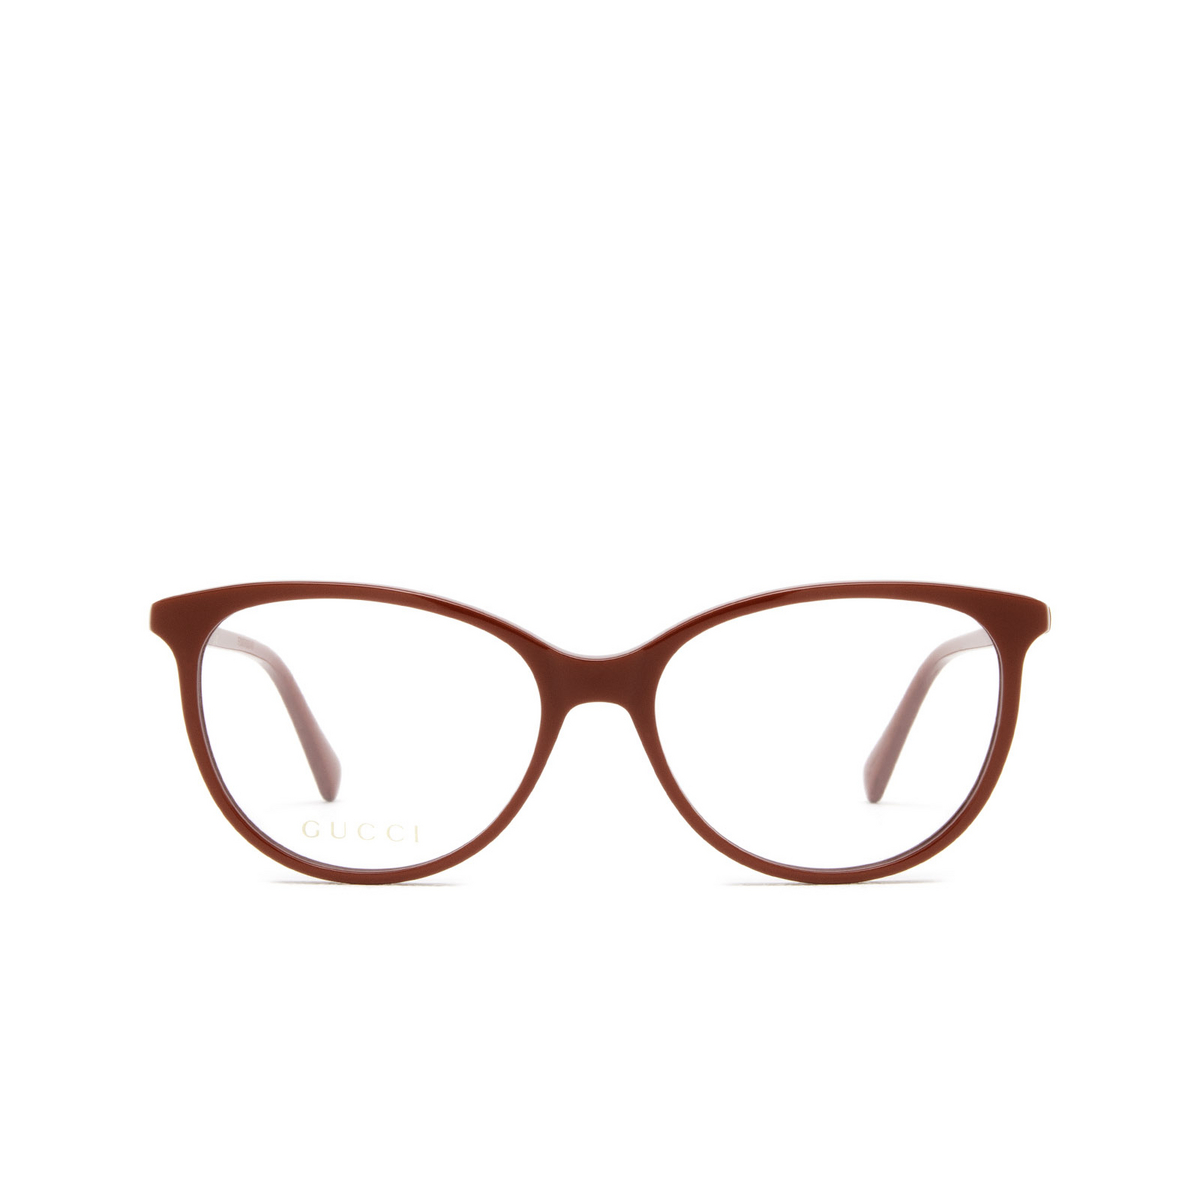 Gucci® Cat-eye Eyeglasses: GG0550O color Red 009 - front view.